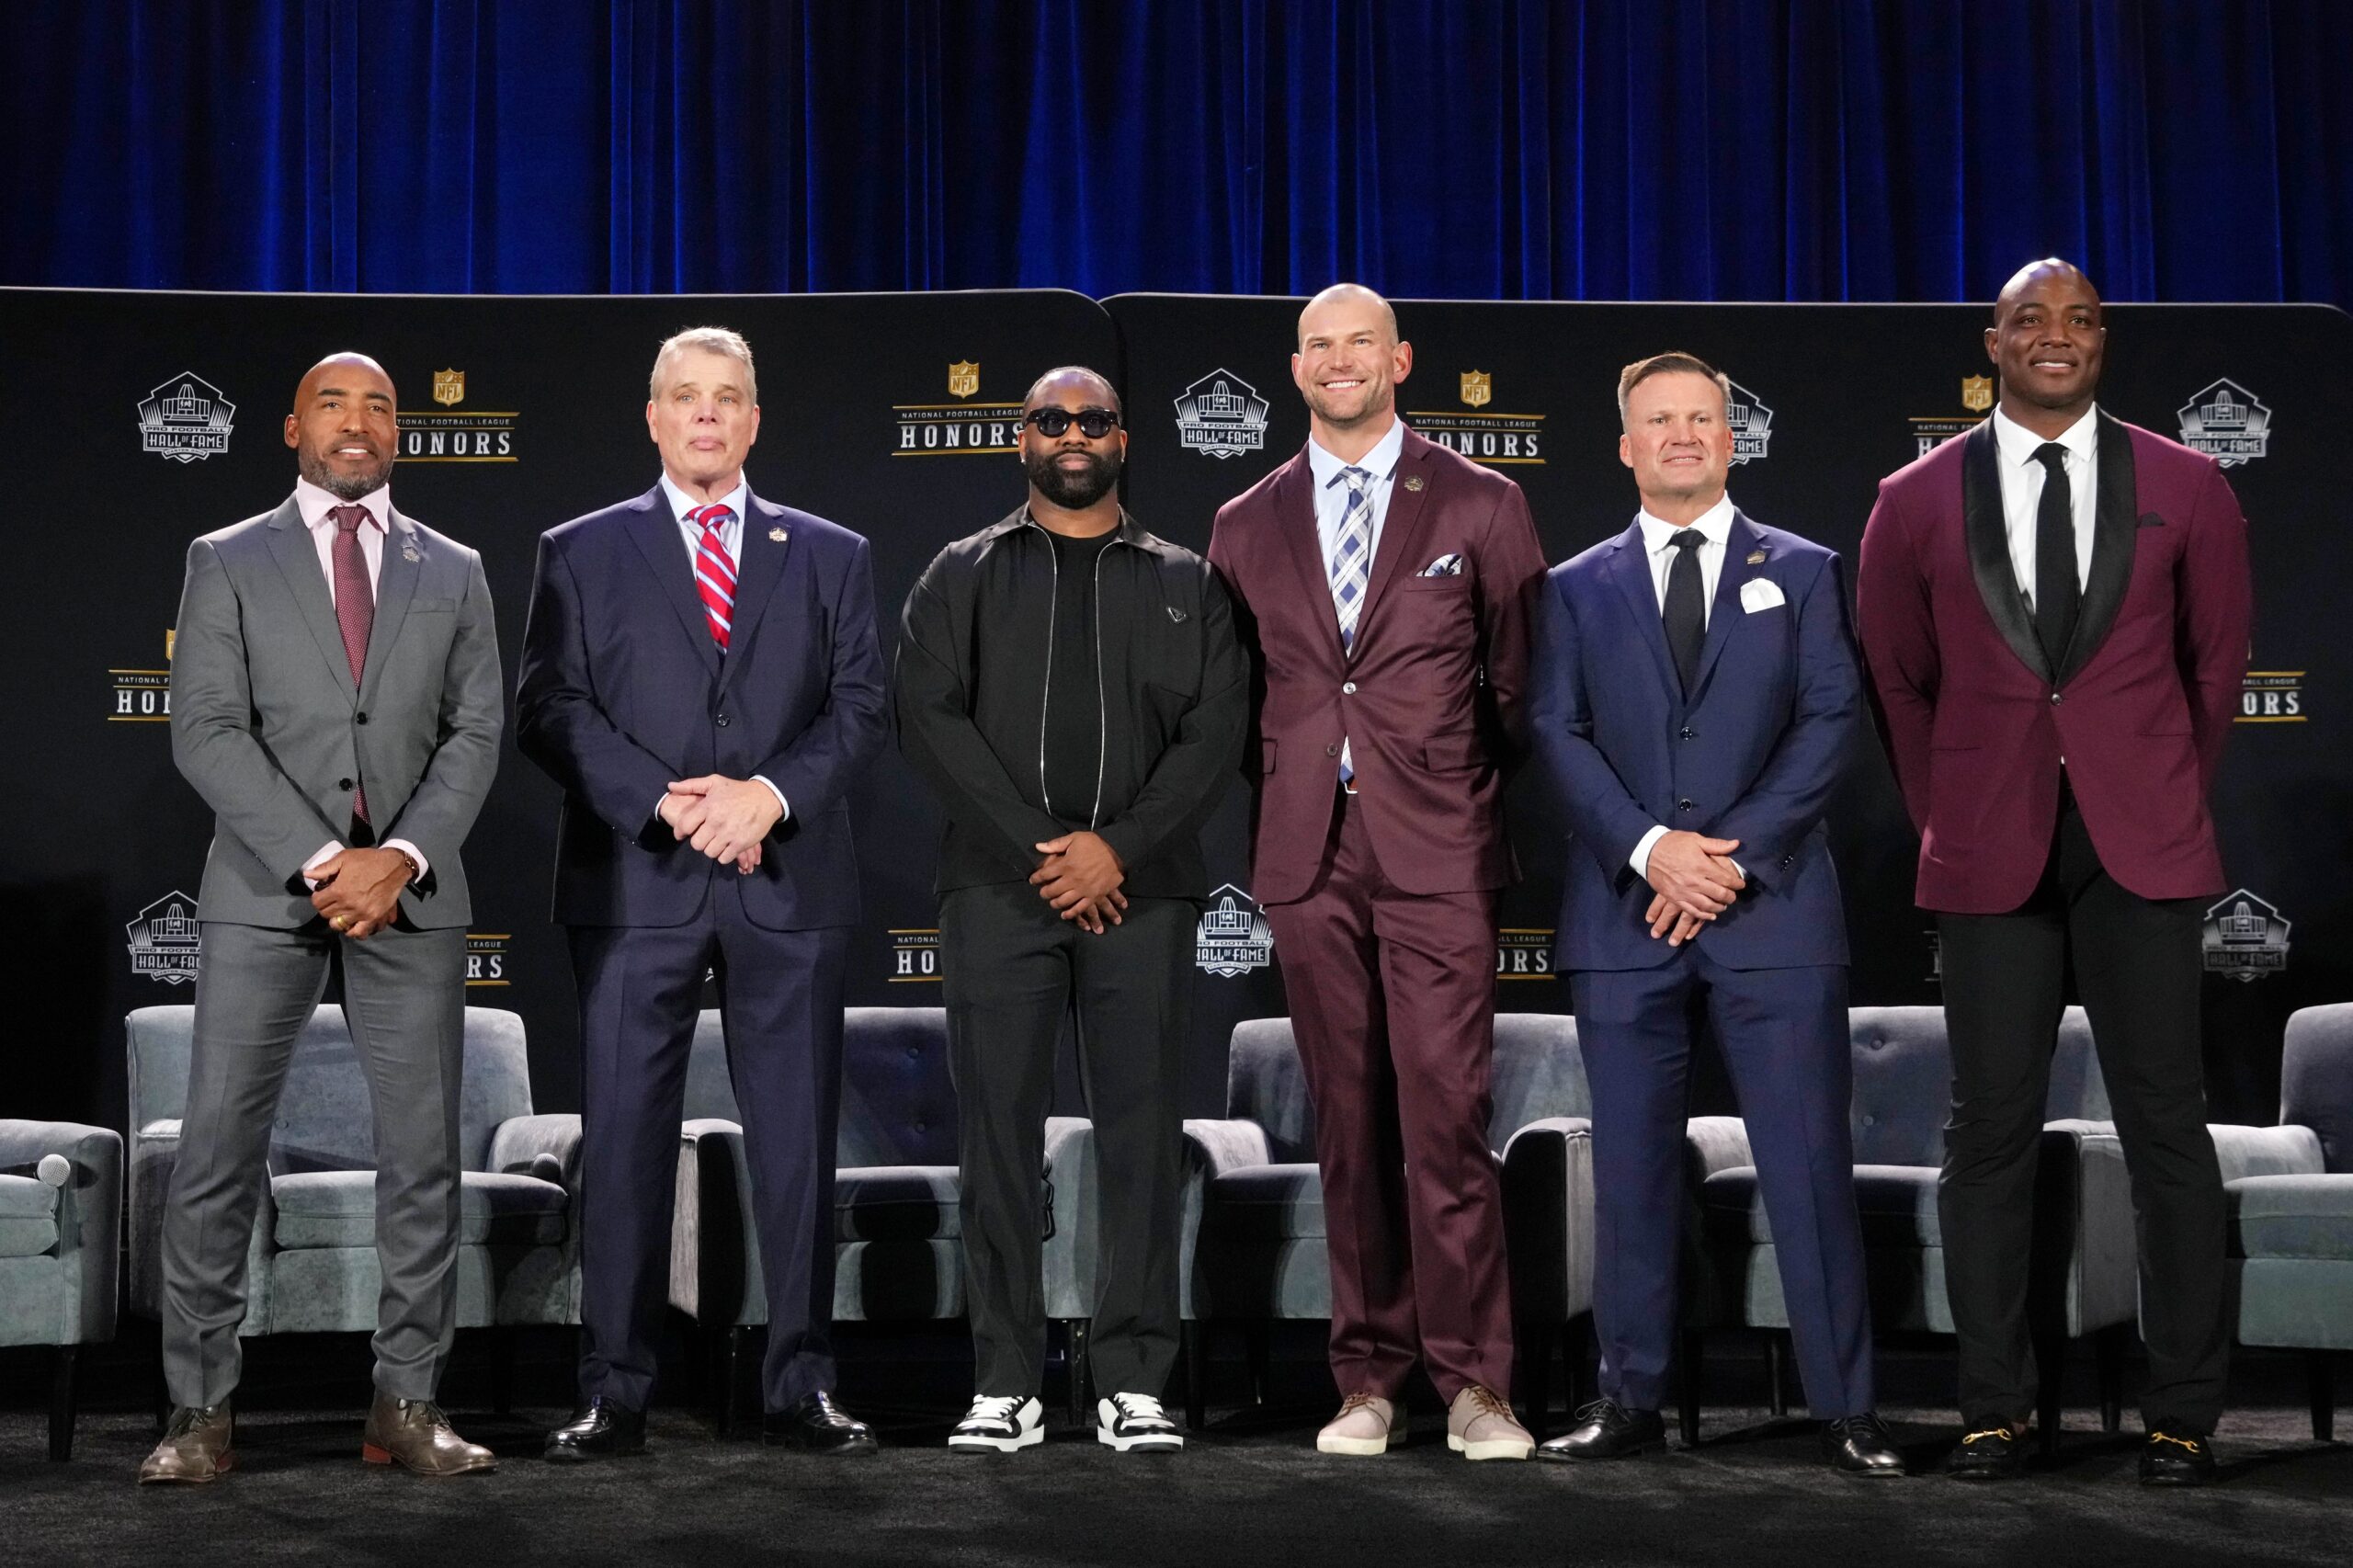 2023 Hall of Fame Class: Who Are the NFL Hall of Fame Inductees This Year?